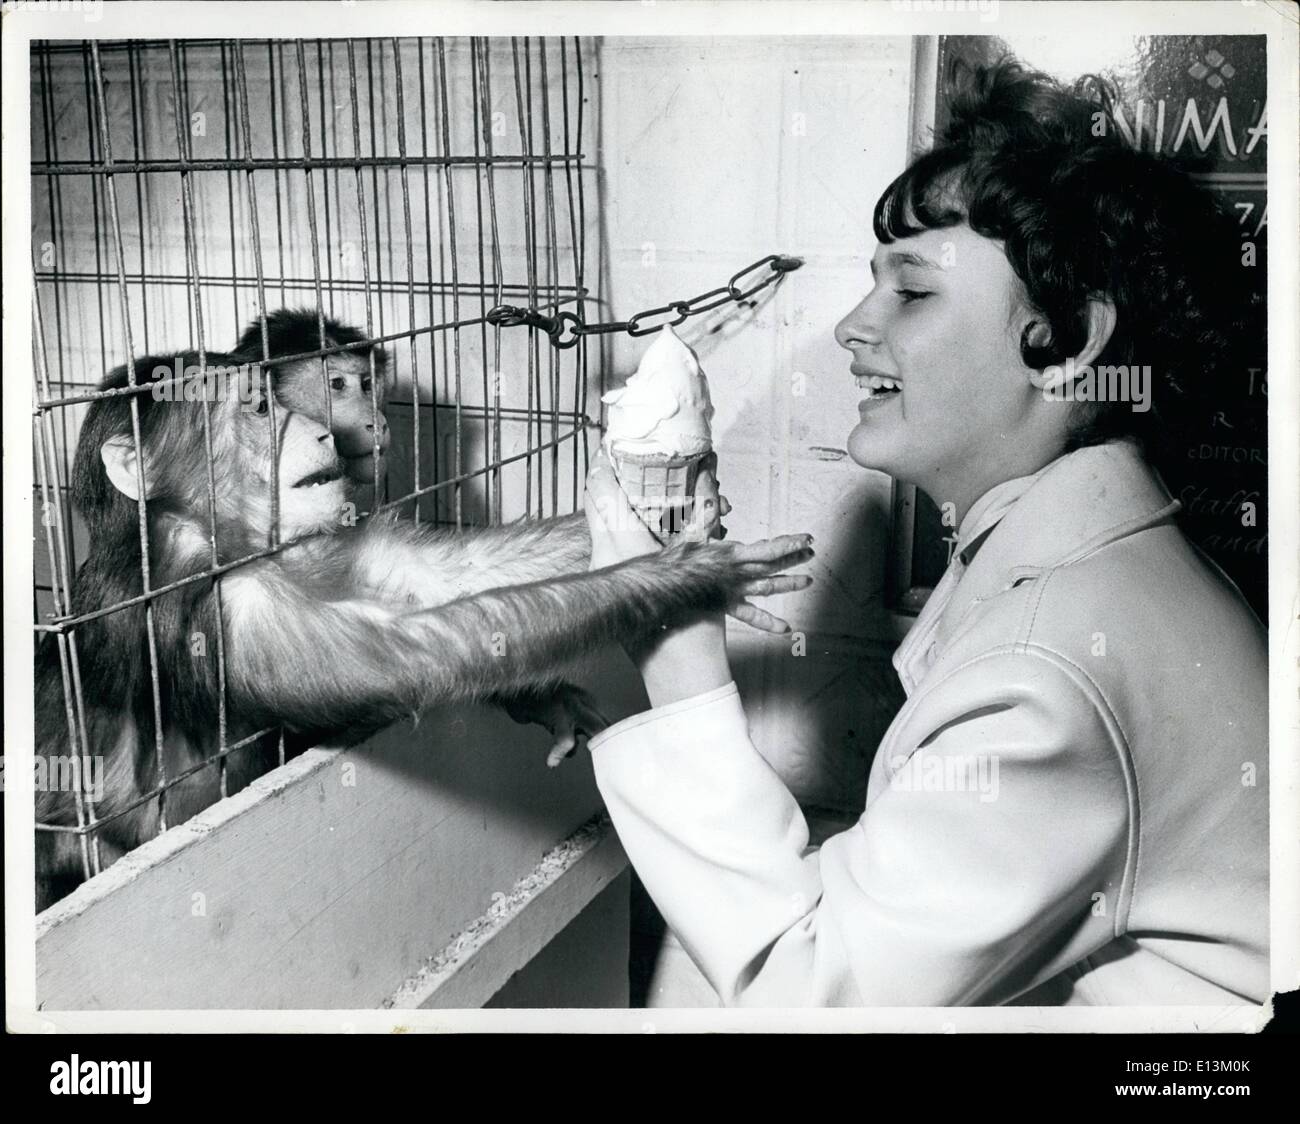 Mar. 02, 2012 - Two caged Monkeys grab at the lady's vanilla ice cream cone. Monkeys enjoy a treat every now and then also. Stock Photo